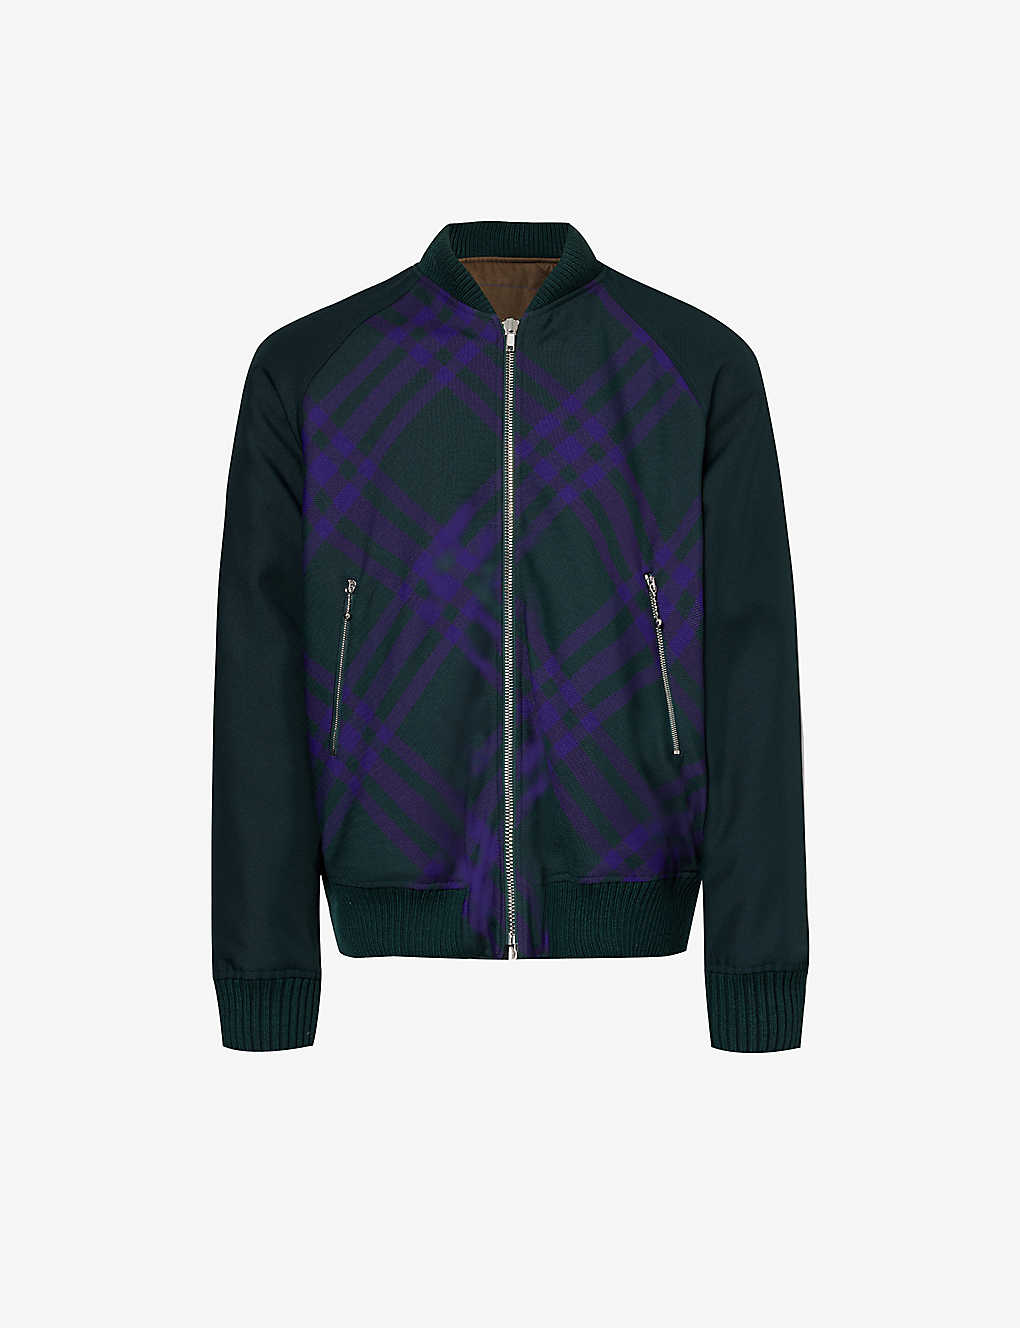 Shop Burberry Men's Deep Royal Ip Check Checked-pattern Reversible Twill Bomber Jacket